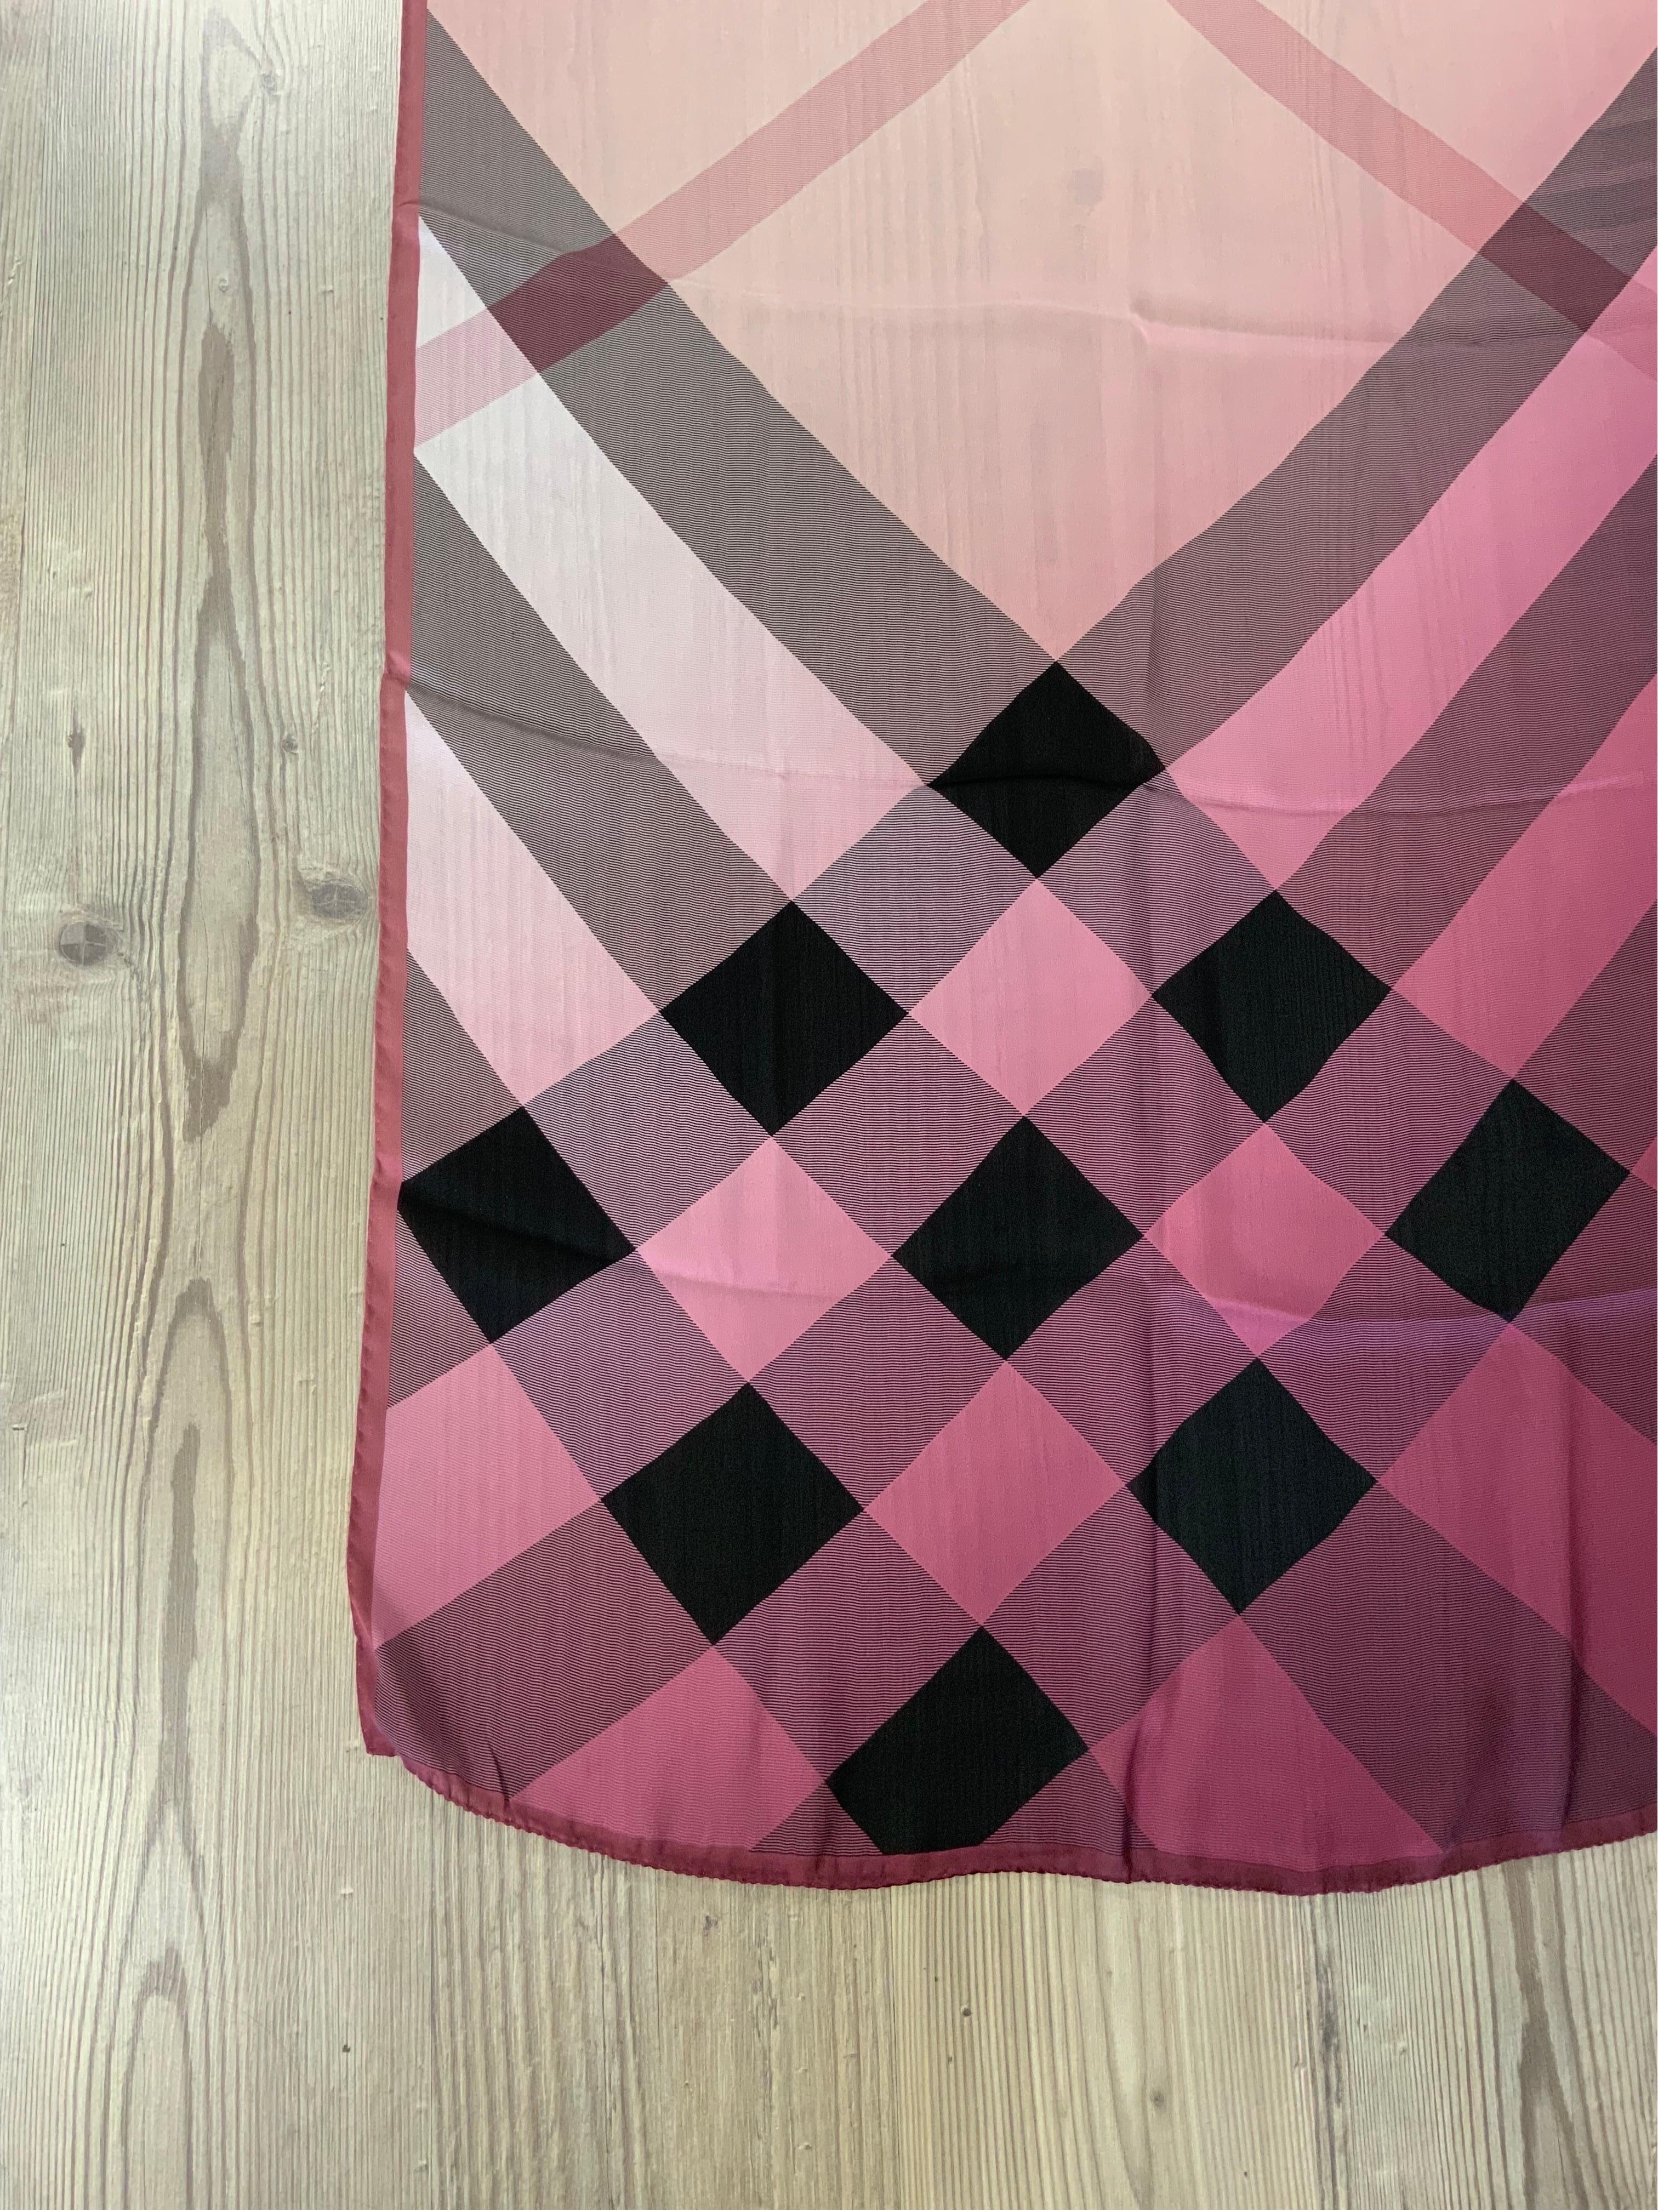 Burberry foulard.
In silk, very light material.
It measures 190 cm X 70 cm.
Excellent condition, like new.